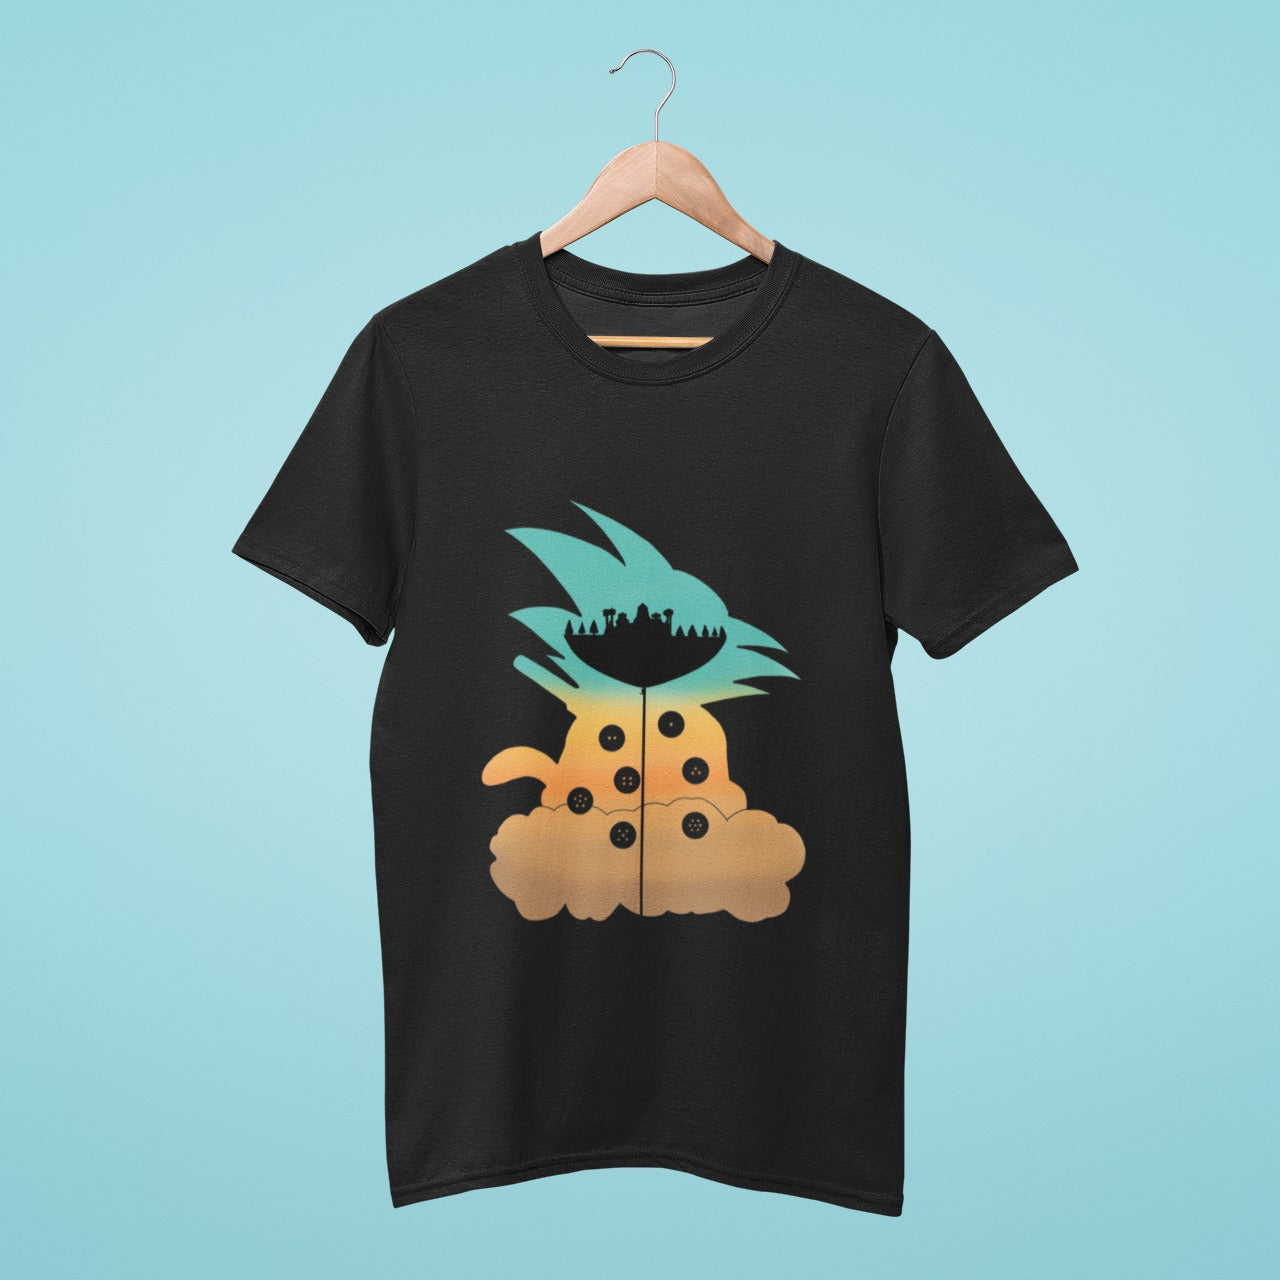 Show off your love for Dragon Ball with our black t-shirt featuring a silhouette of Kid Goku sitting on Nimbus surrounded by the 9 Dragon Balls and Kami's house. Made with high-quality materials, this comfortable and durable t-shirt is perfect for any fan of the legendary anime series. Order now and add this stylish t-shirt to your anime-inspired wardrobe!